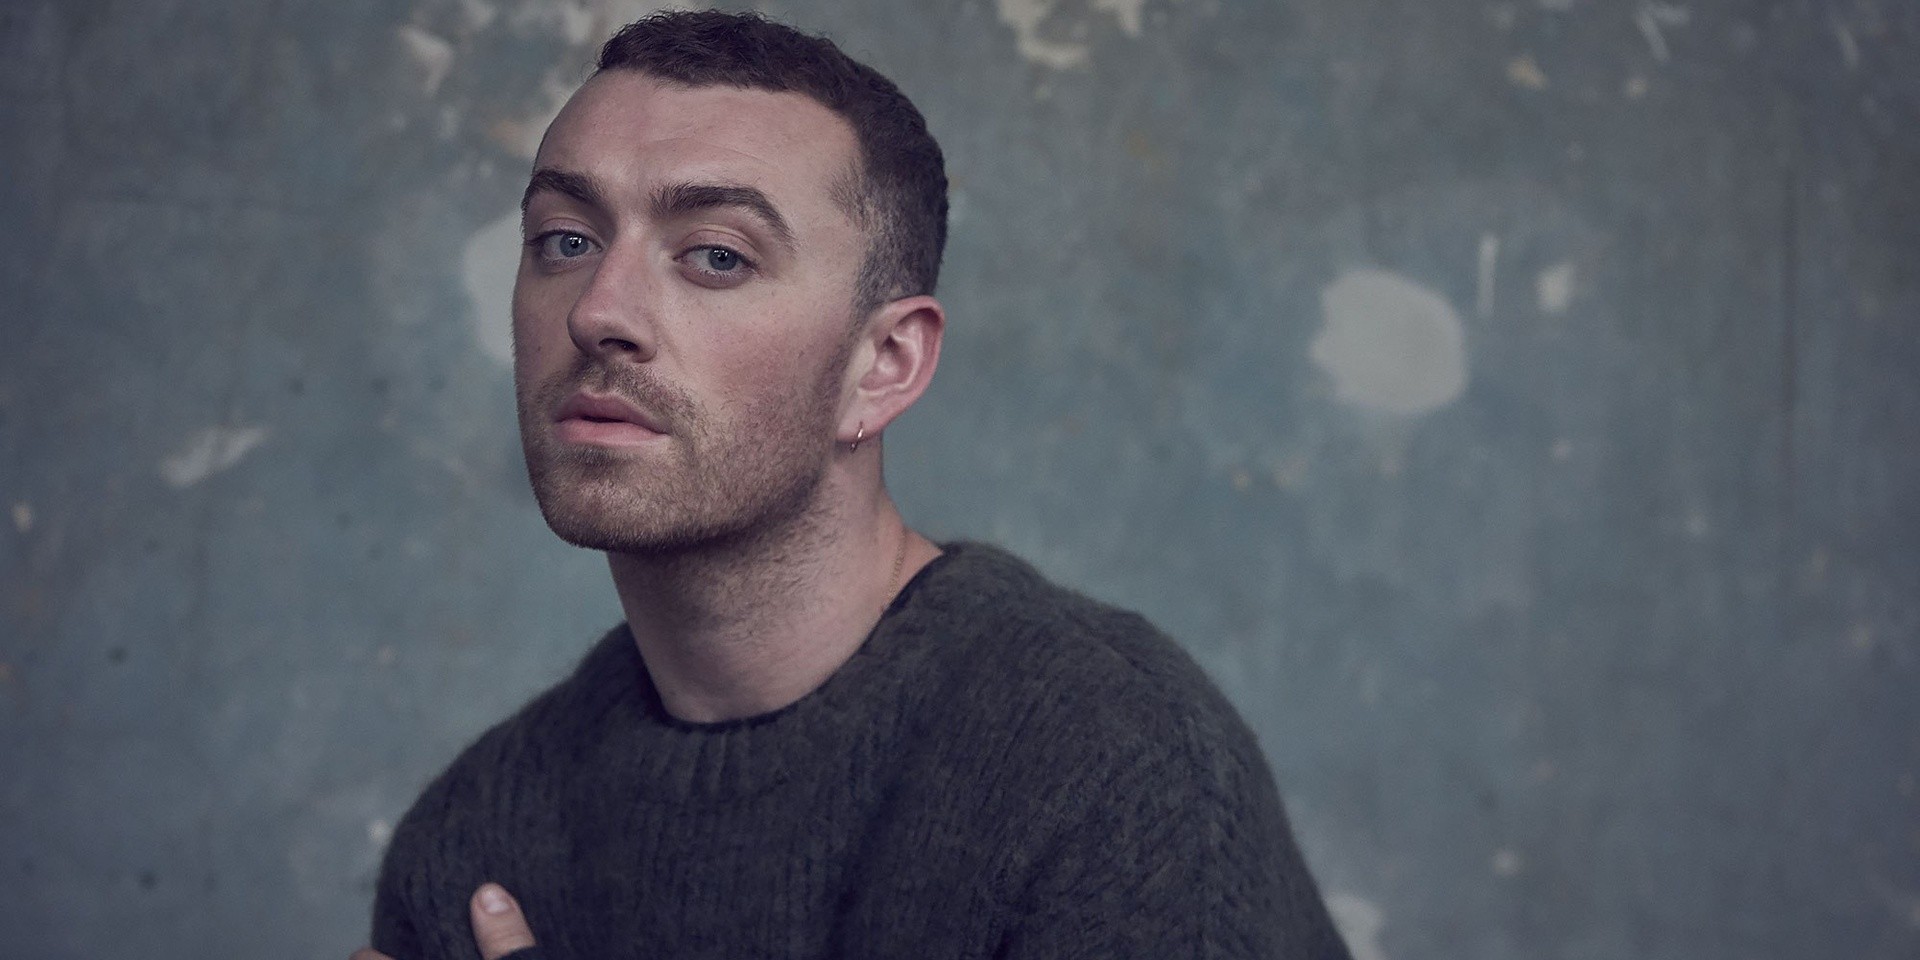 Sam Smith releases new track 'Fire on Fire' – listen